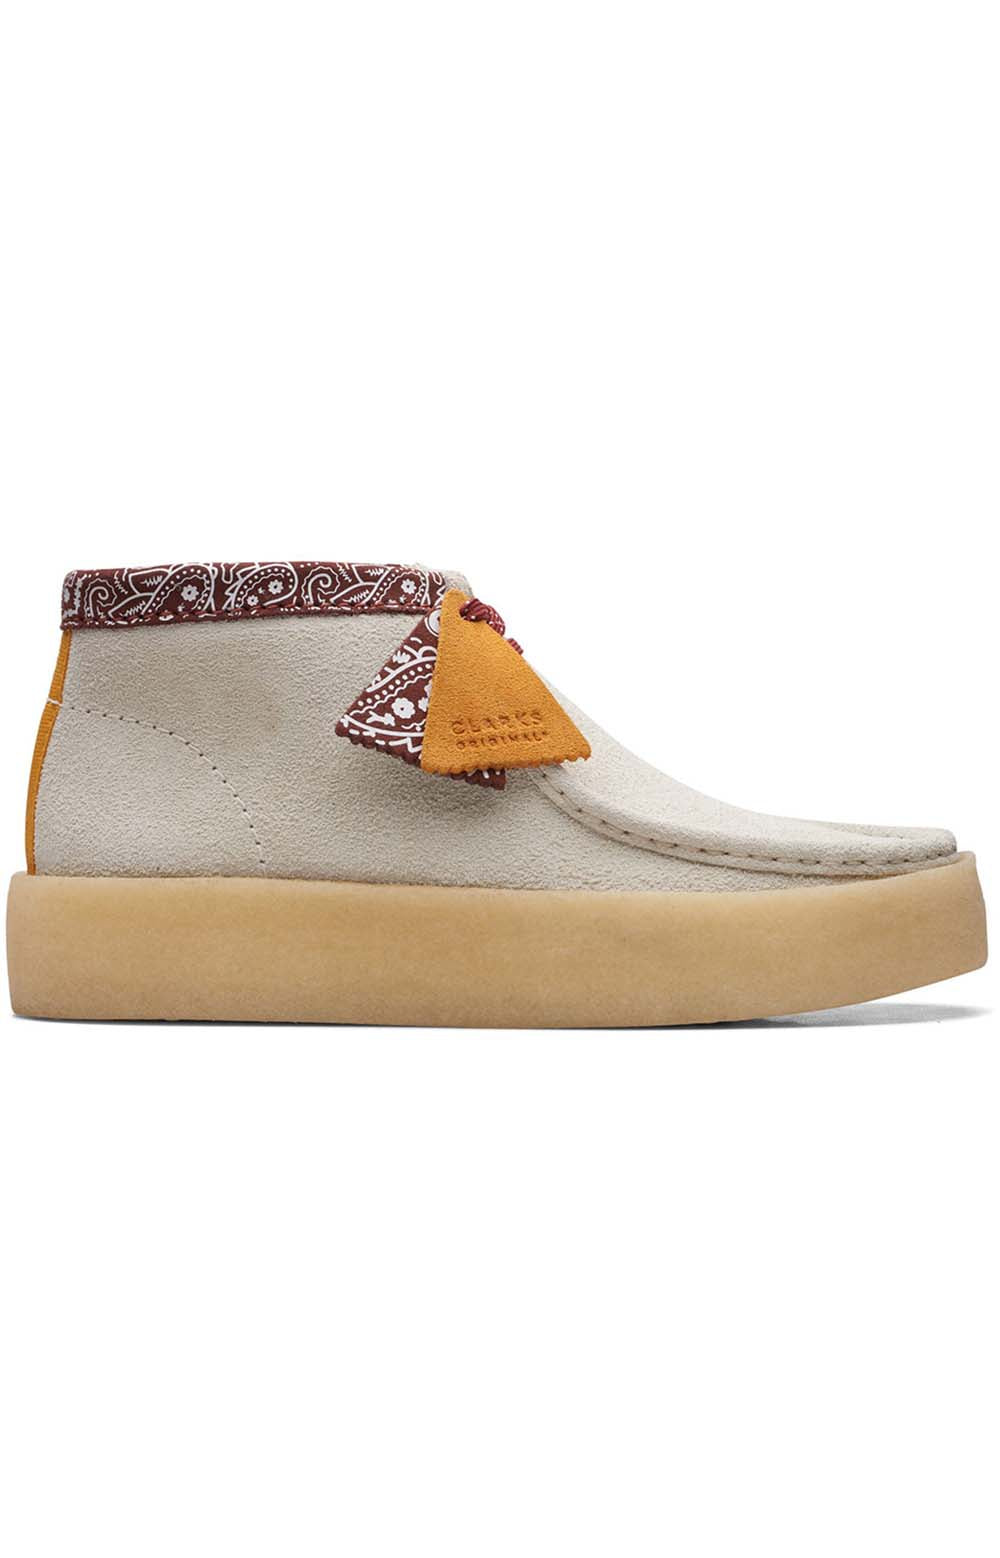 (26167977) Wallabee Cup Boots - White Interest